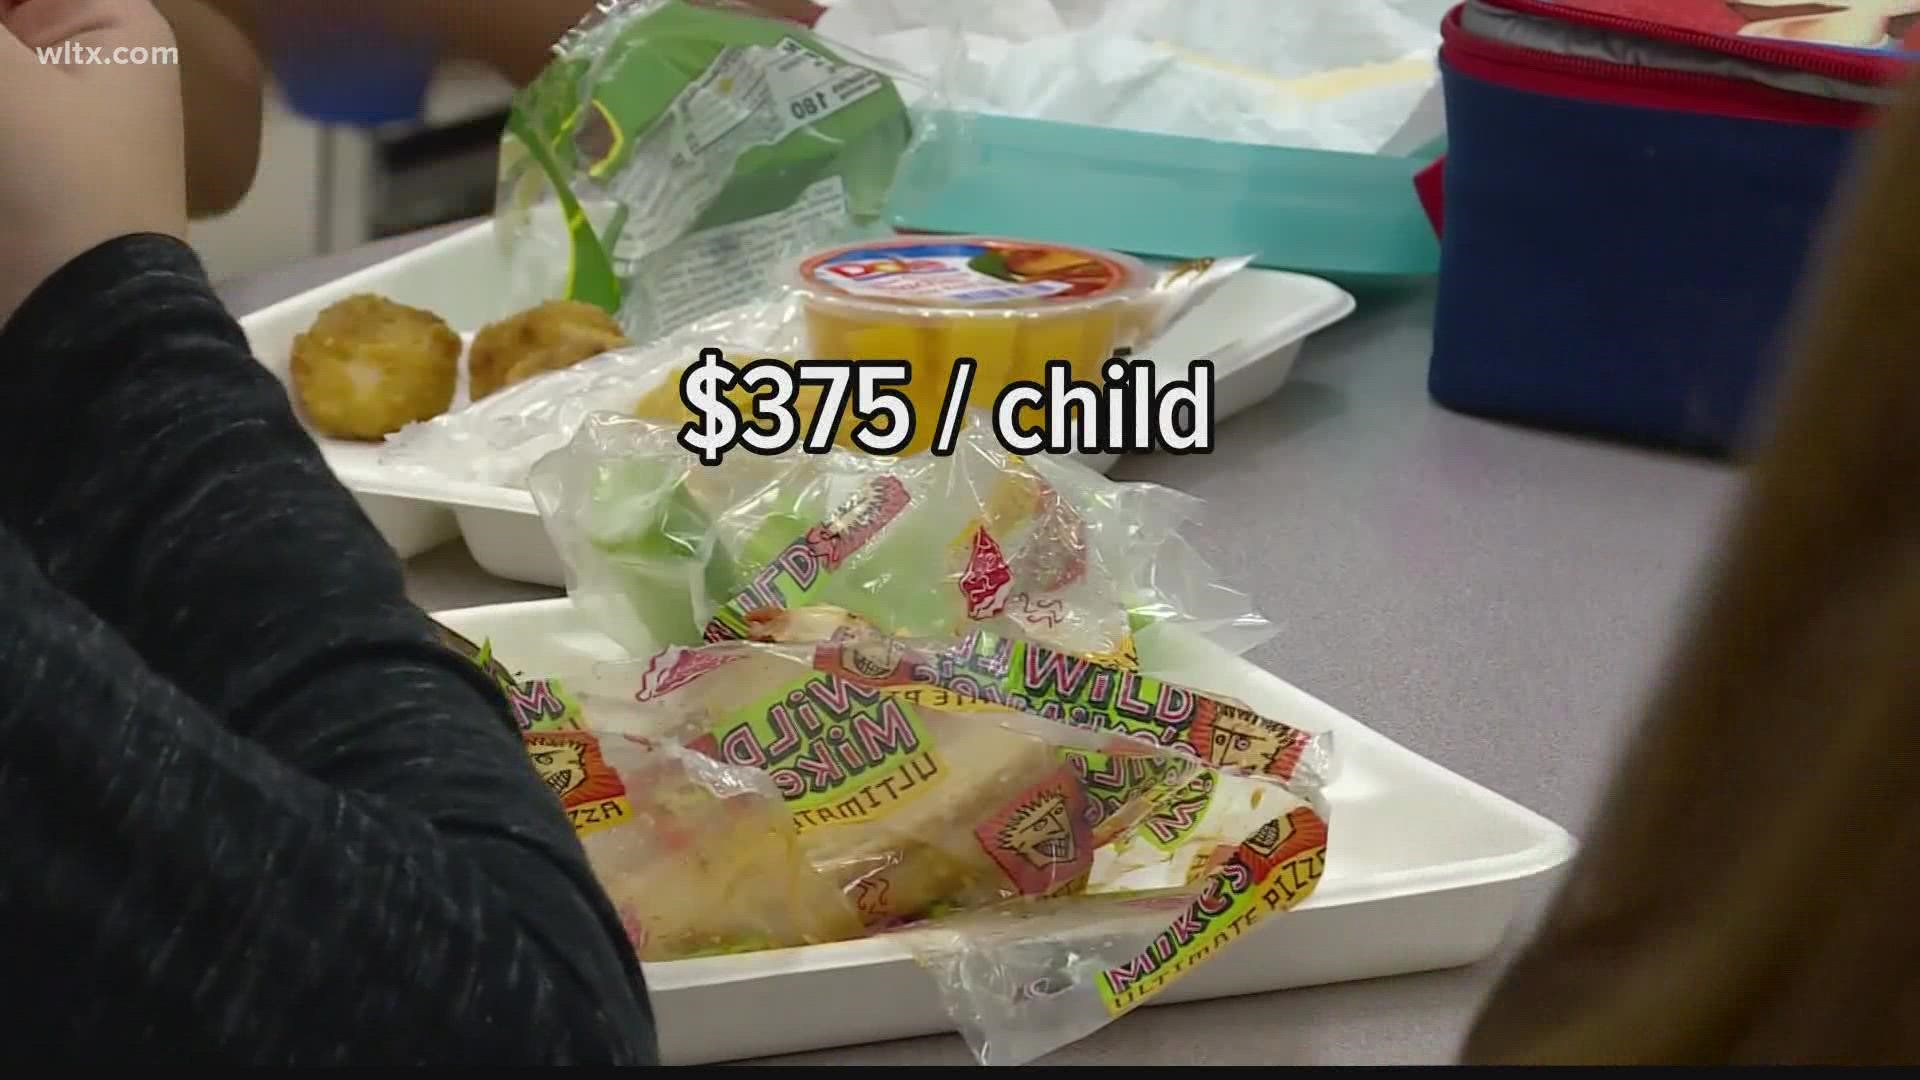 If your child receives free or reduced price meals at school you could be eligible for hundreds of dollars in food benefits.